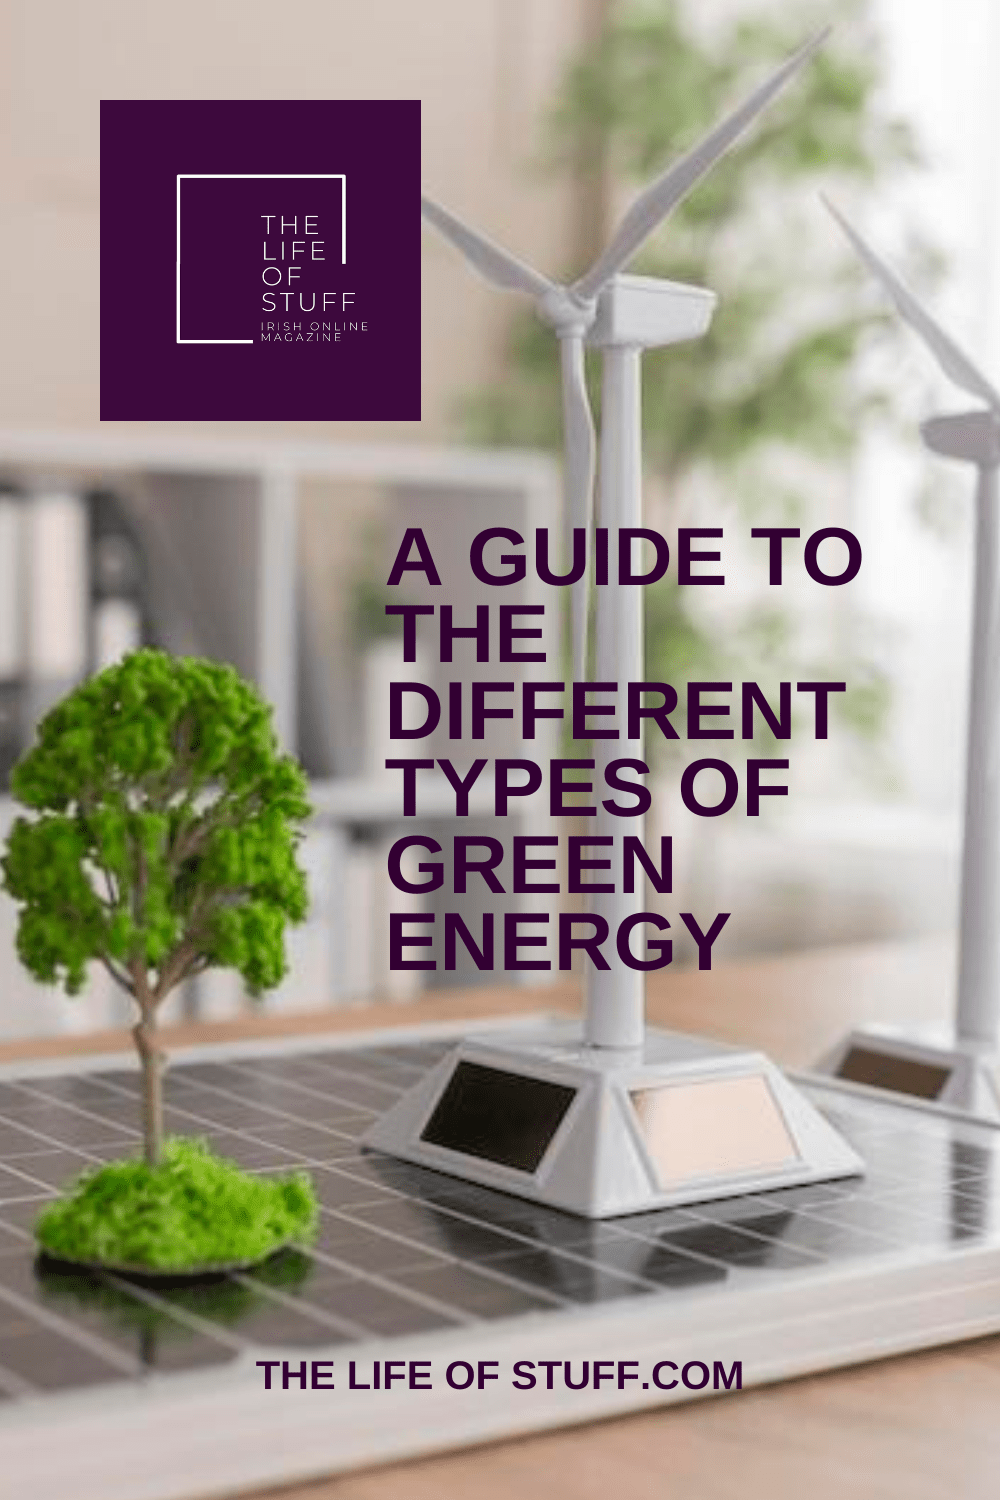 A Guide to the Different Types of Green Energy - The Life of Stuff